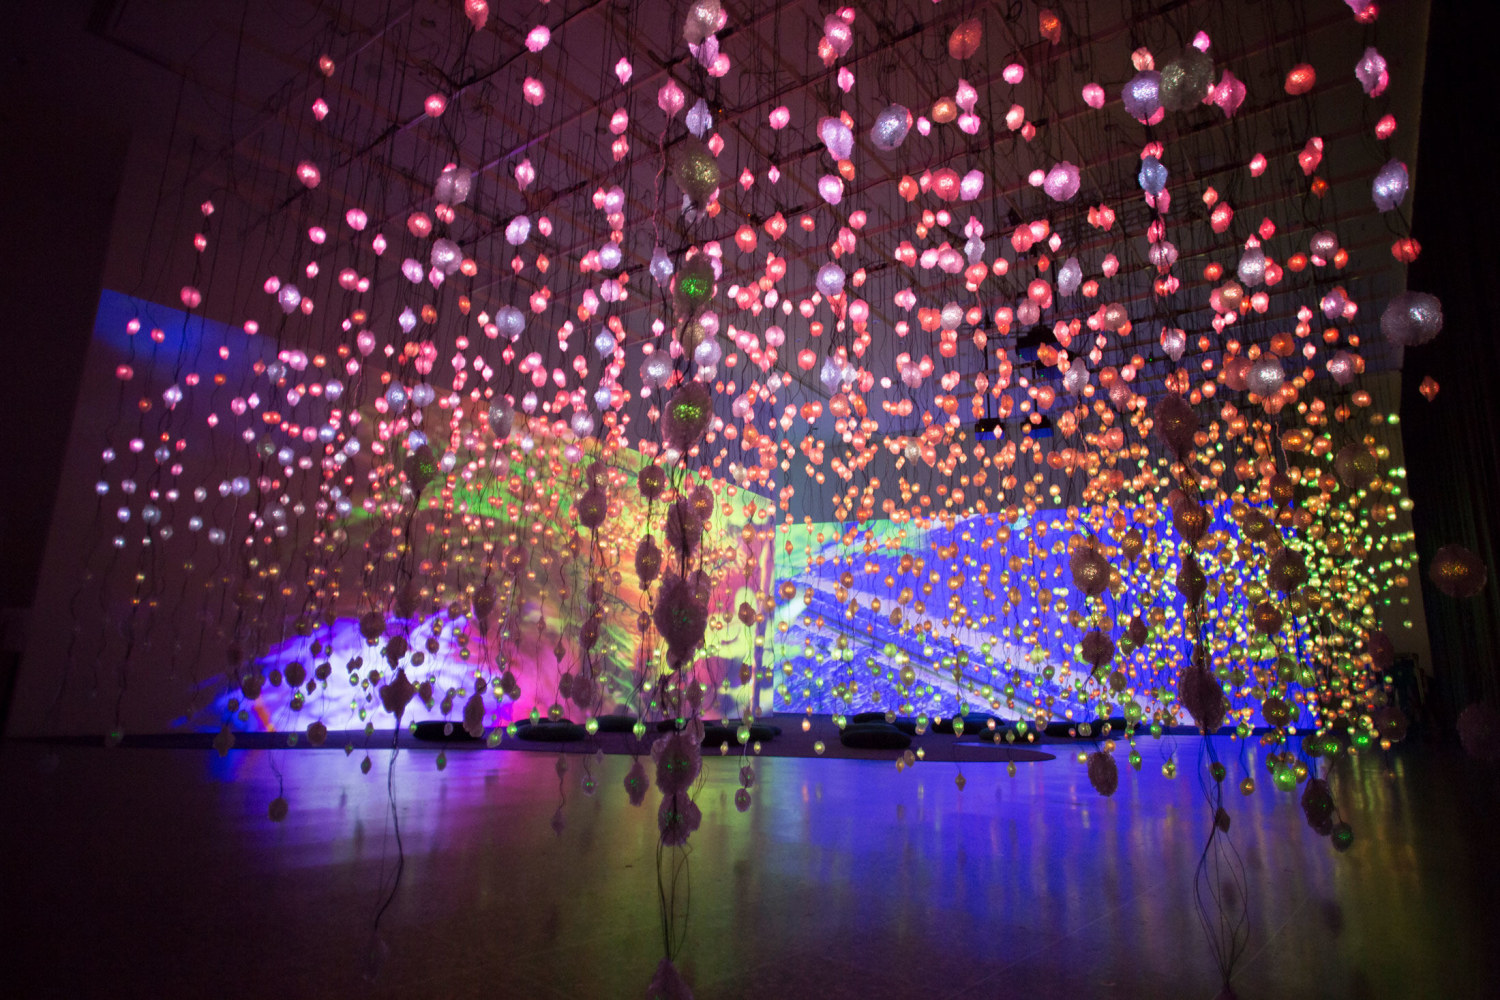 Pipilotti Rist
Pixelwald (Pixel Forest), 2016
Hanging LED light installation and media player
Duration: 35 minutes
Dimensions variable
Installation view,&amp;nbsp;MFA Houston, 2017
Photo: The Storyhive&amp;nbsp;